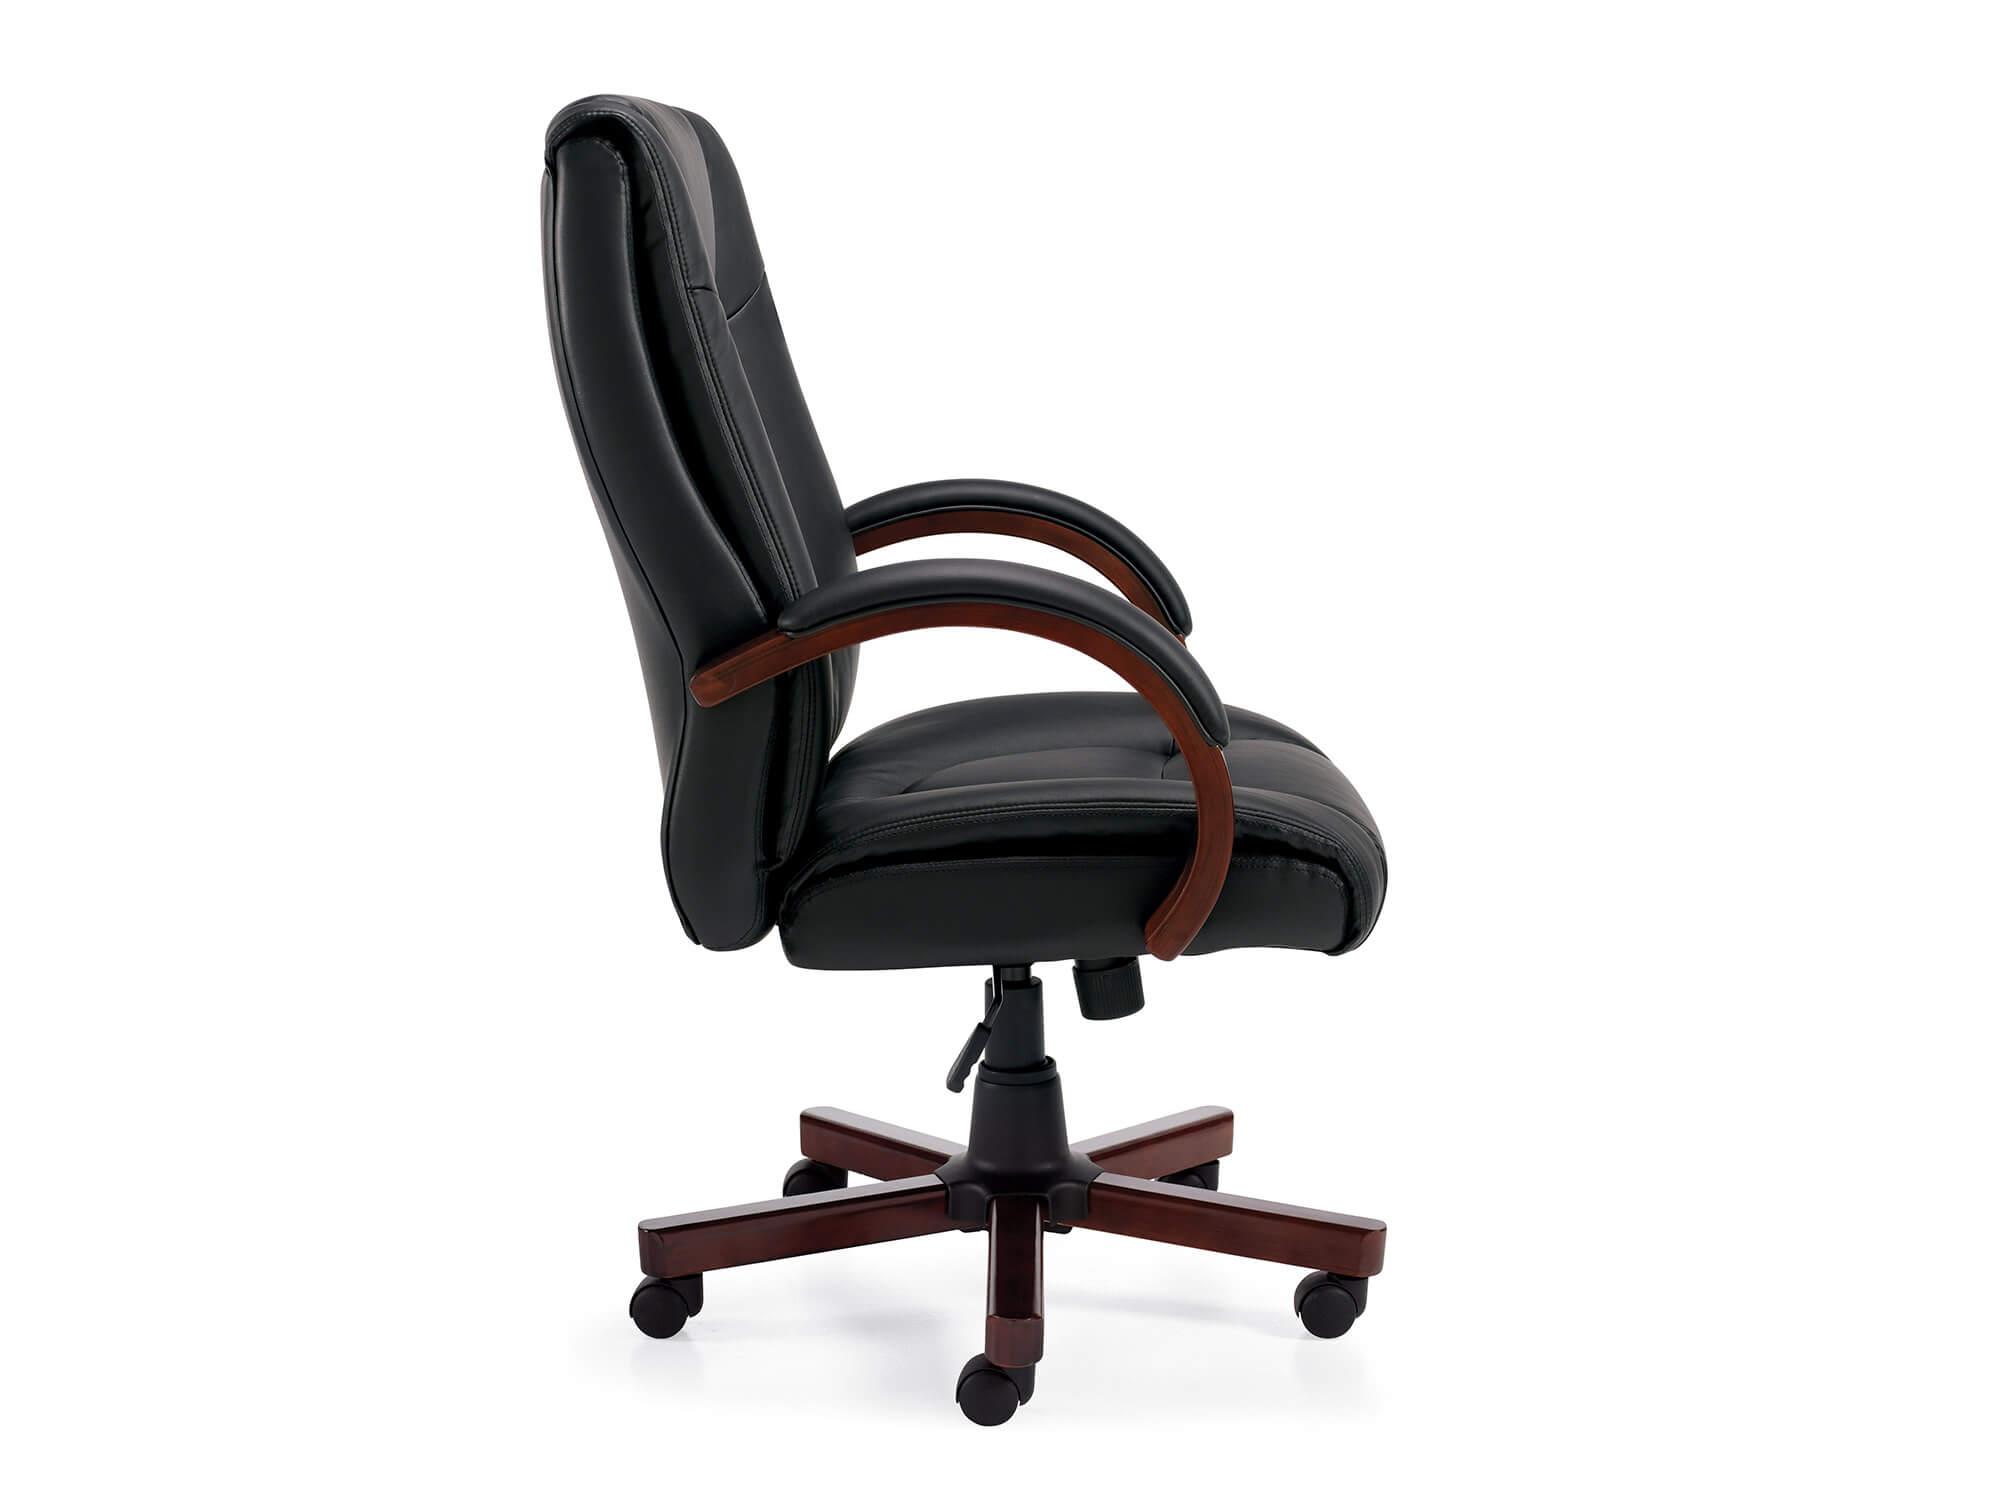 Wood office chair side